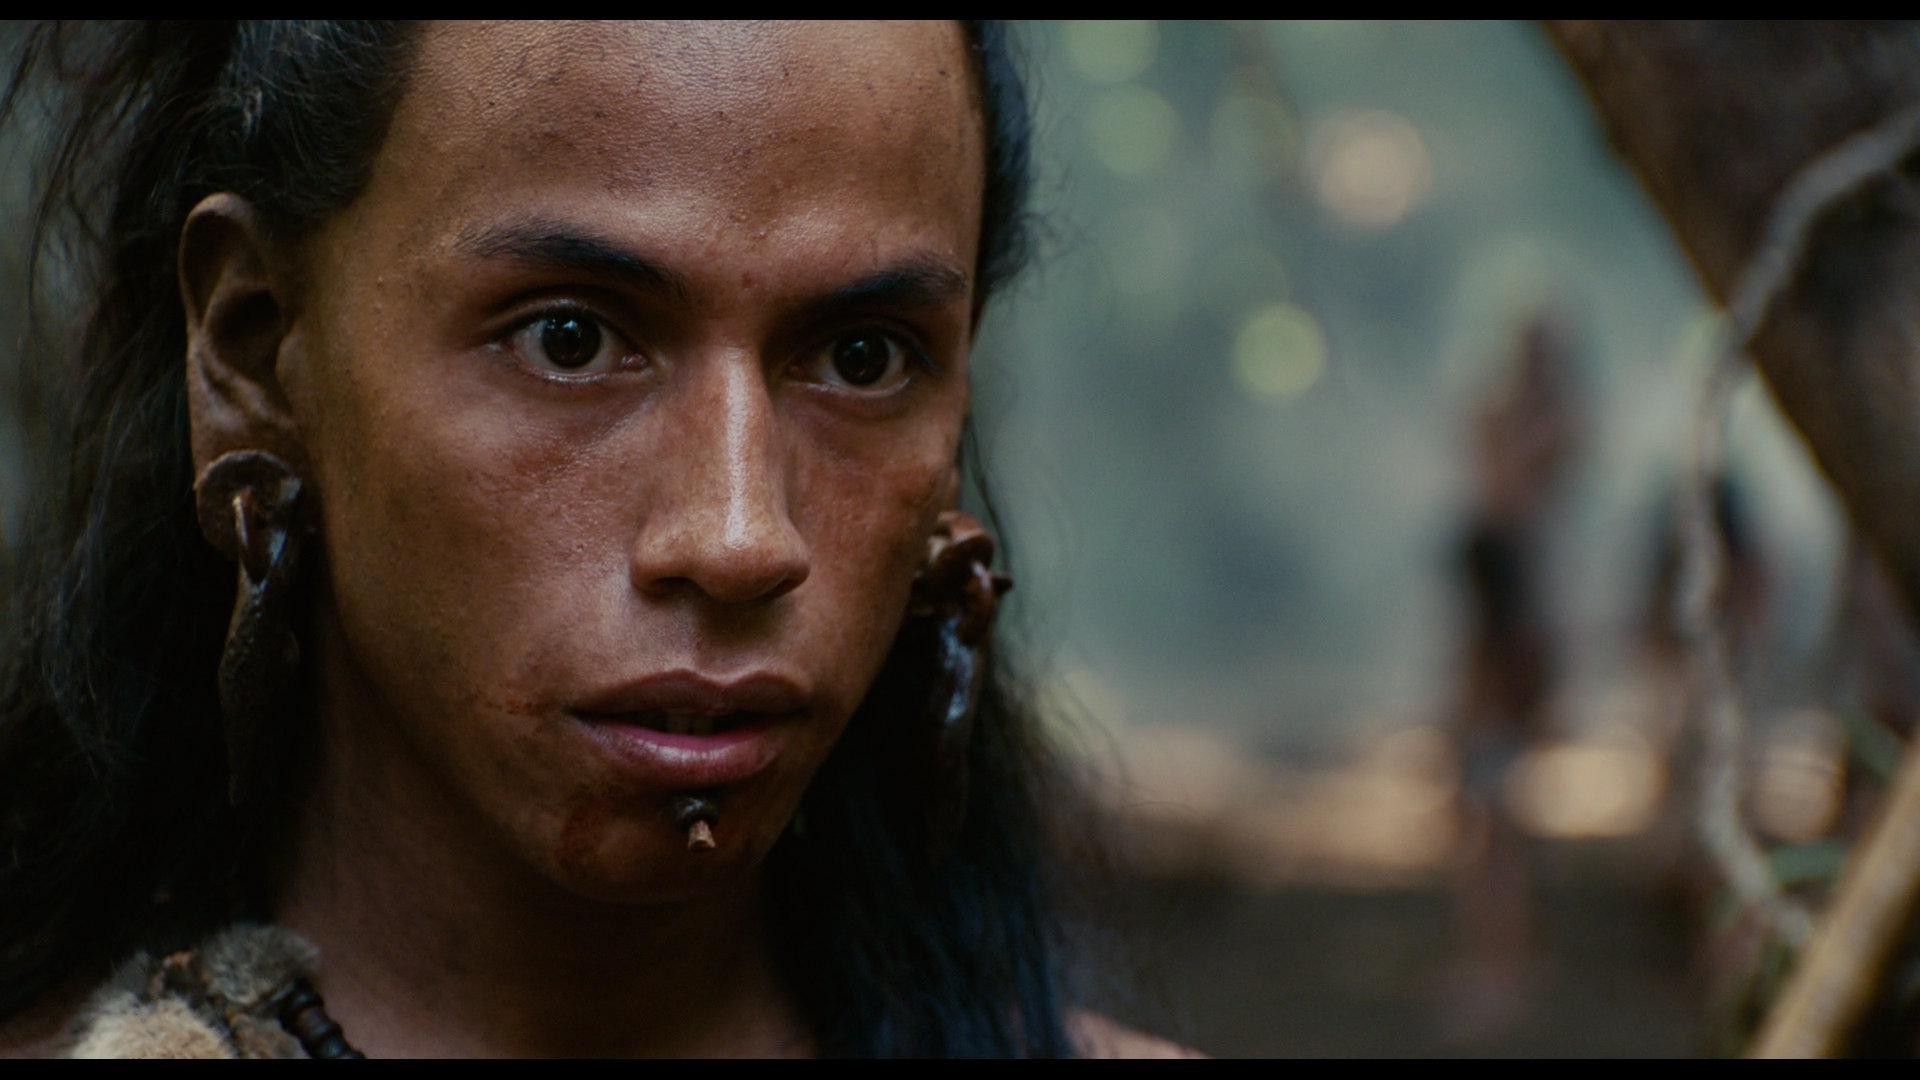 apocalypto full movie in hindi 720p download